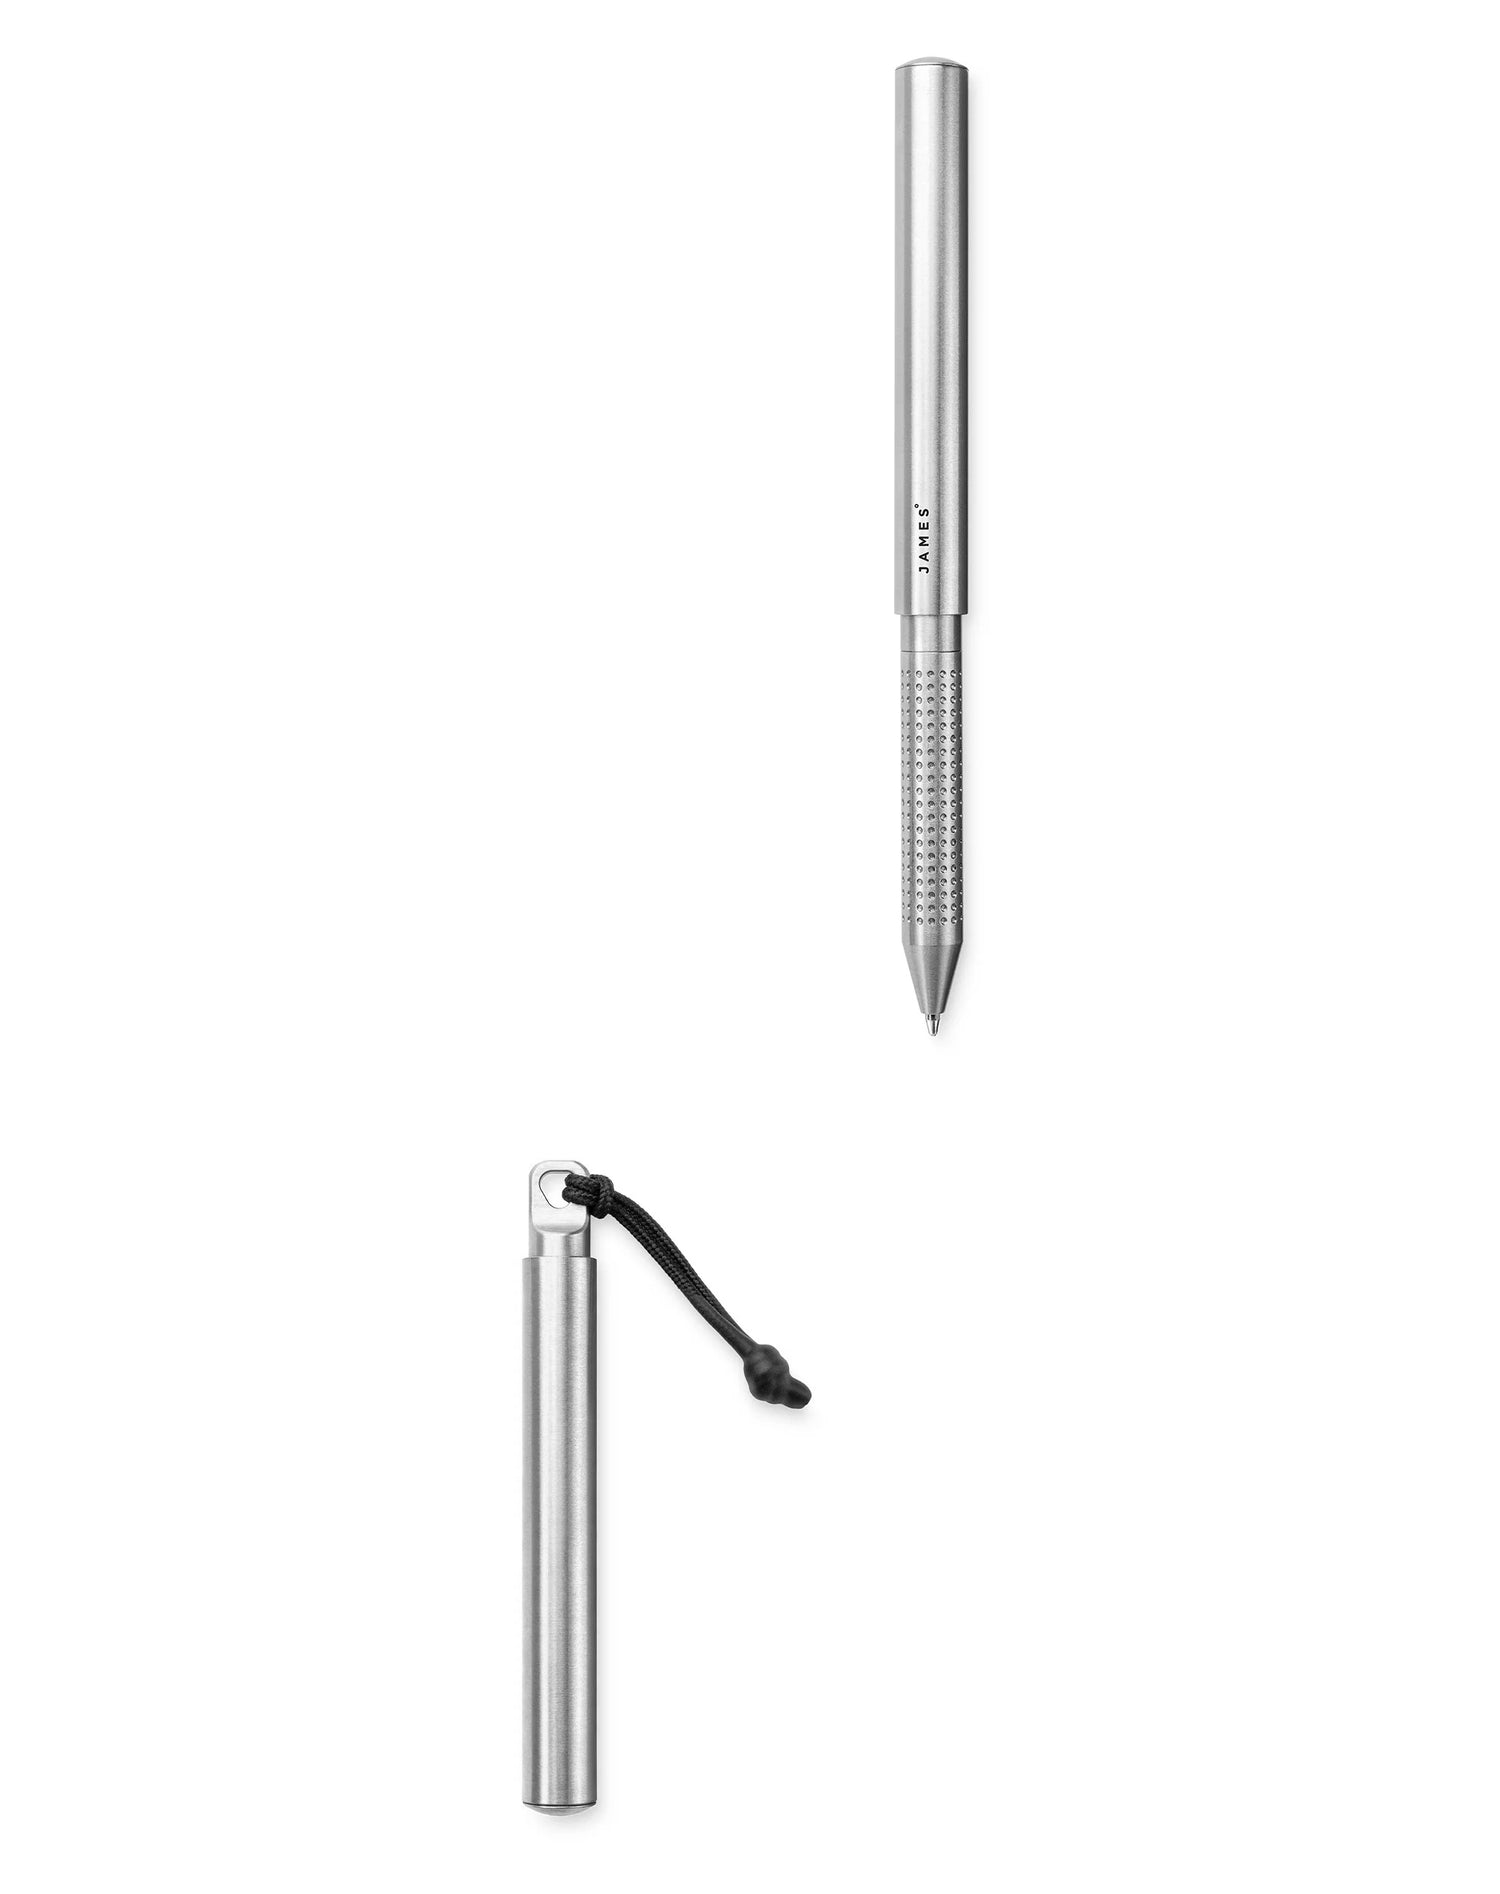 The Stilwell pen showing exterior features.